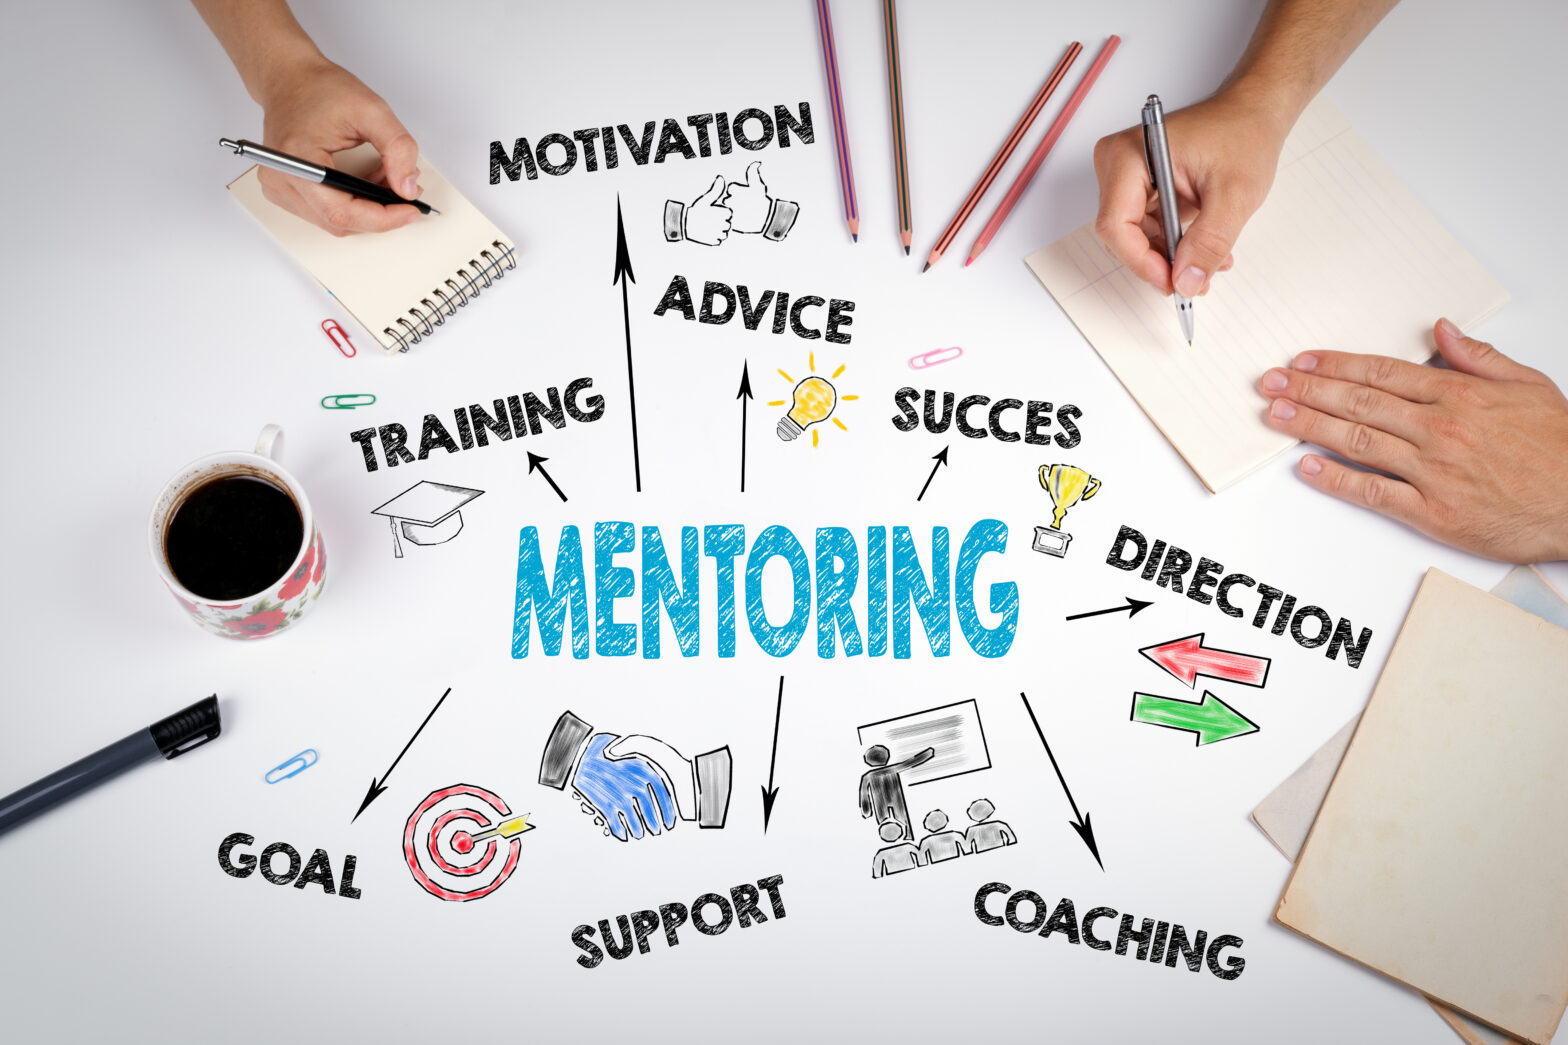 Start-ups can really benefit from a mentor